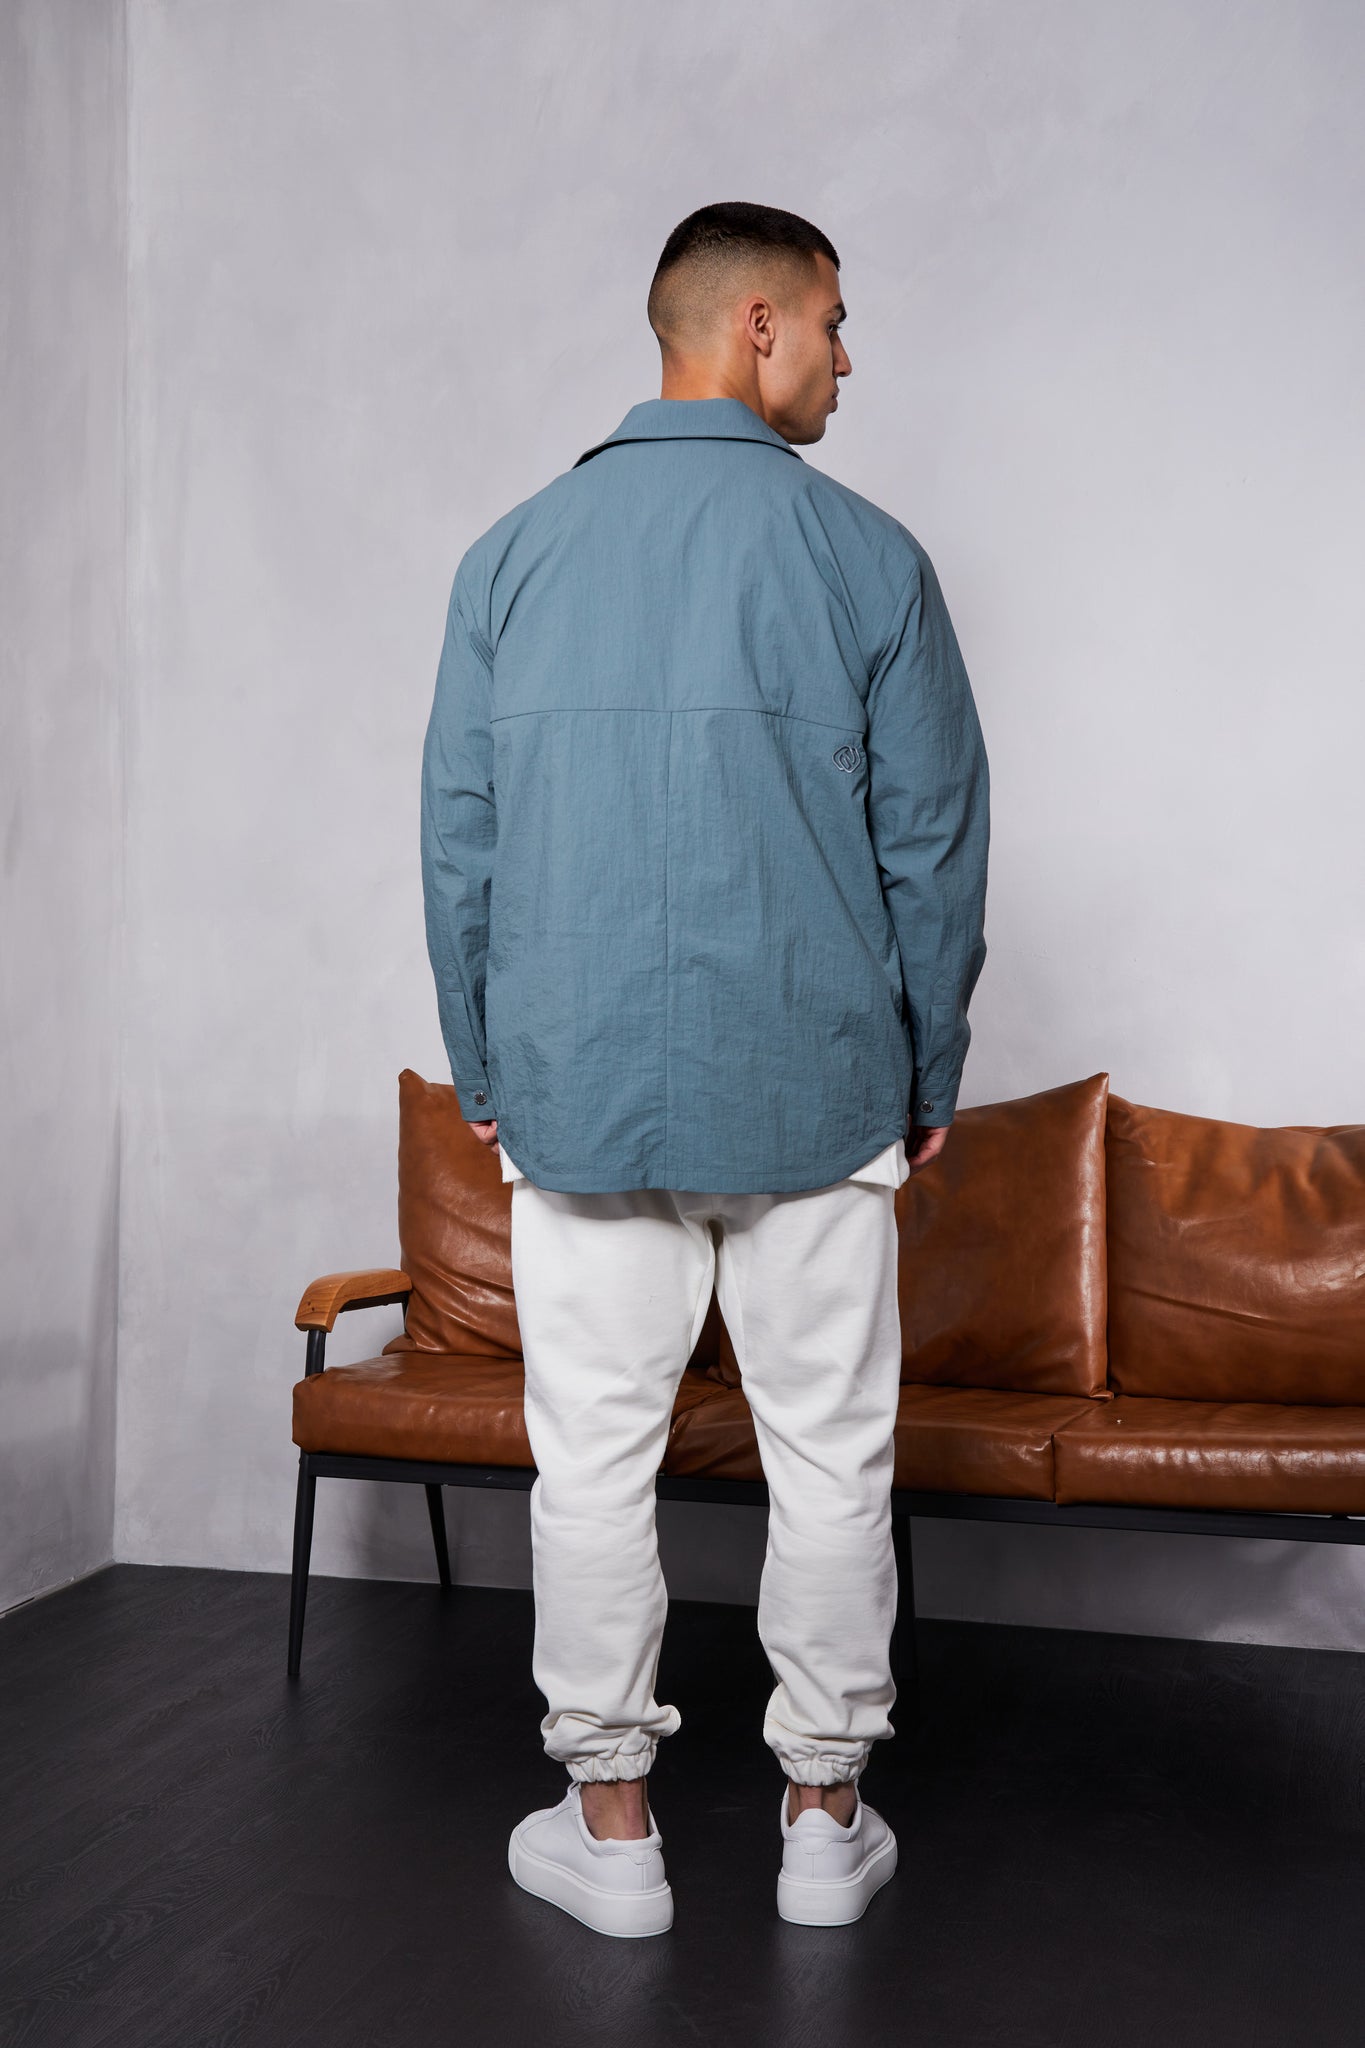 Arezzo Woven Pocket Shirt in Green